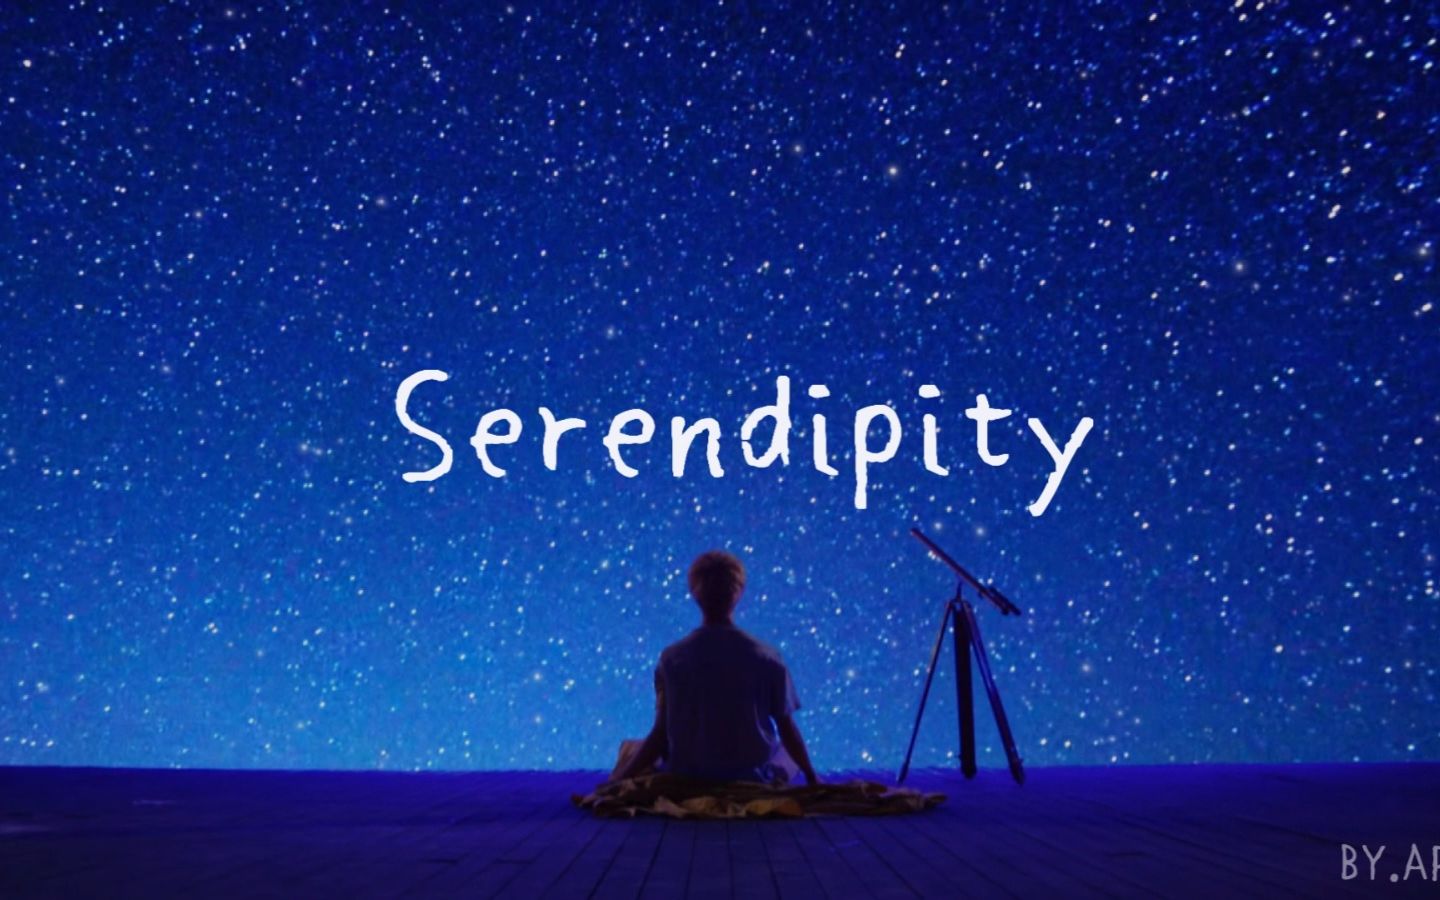 Que significa serendipity